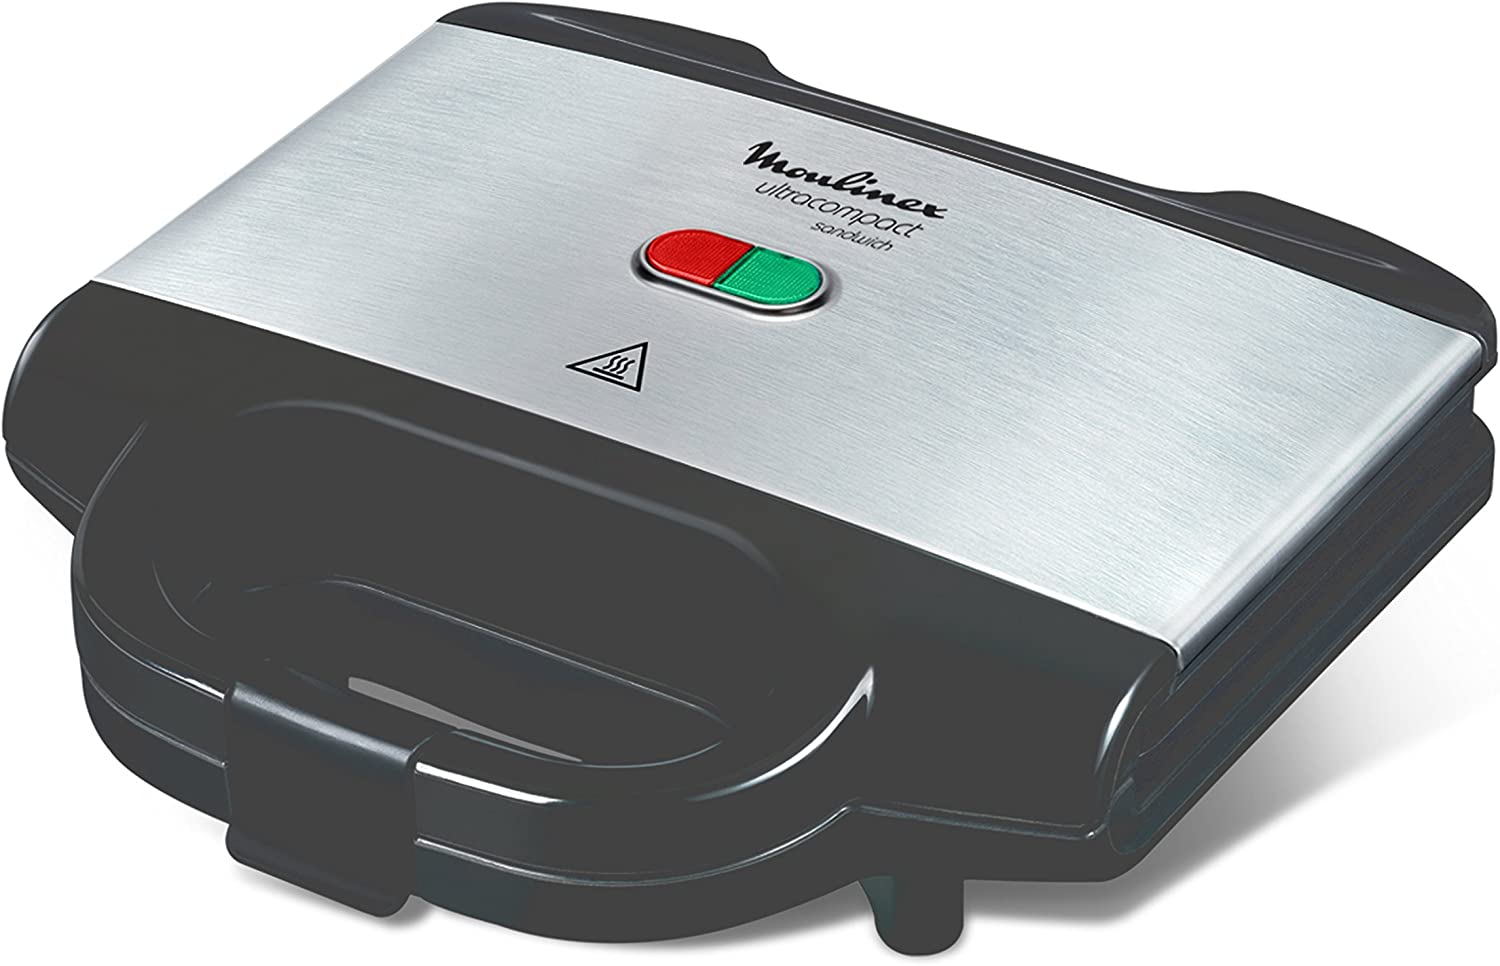 Moulinex SM156D Ultracompact Metal Sandwich Maker with Non-Stick Coating